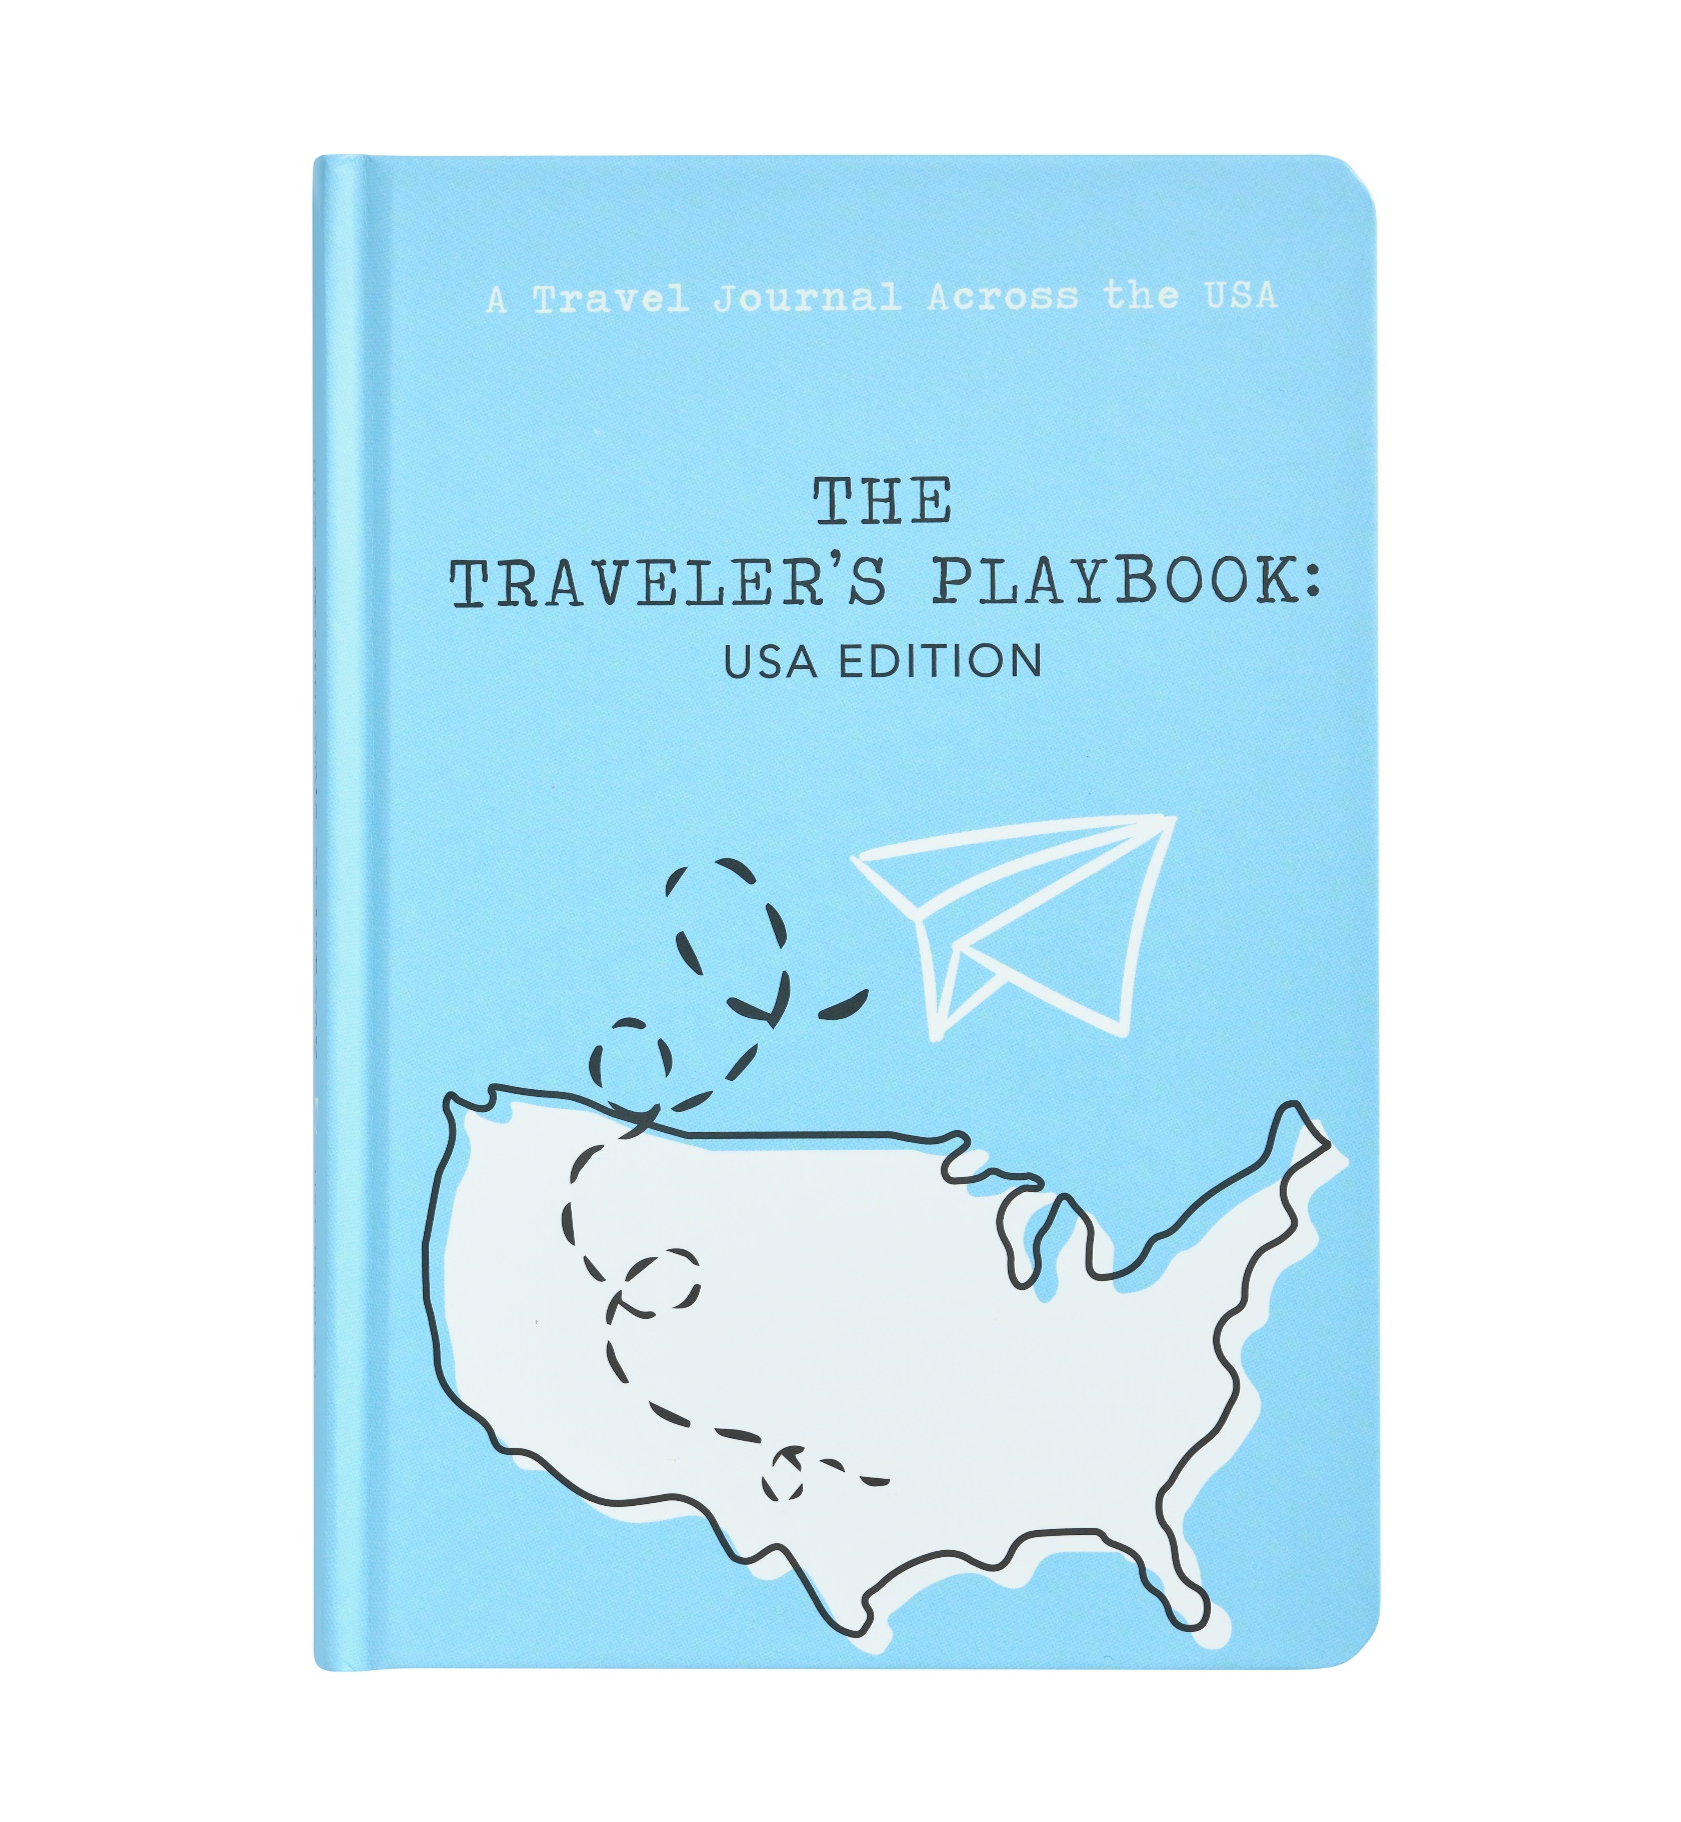 The Traveler's Playbook USA Edition Cover, light blue with title and outline map of the USA